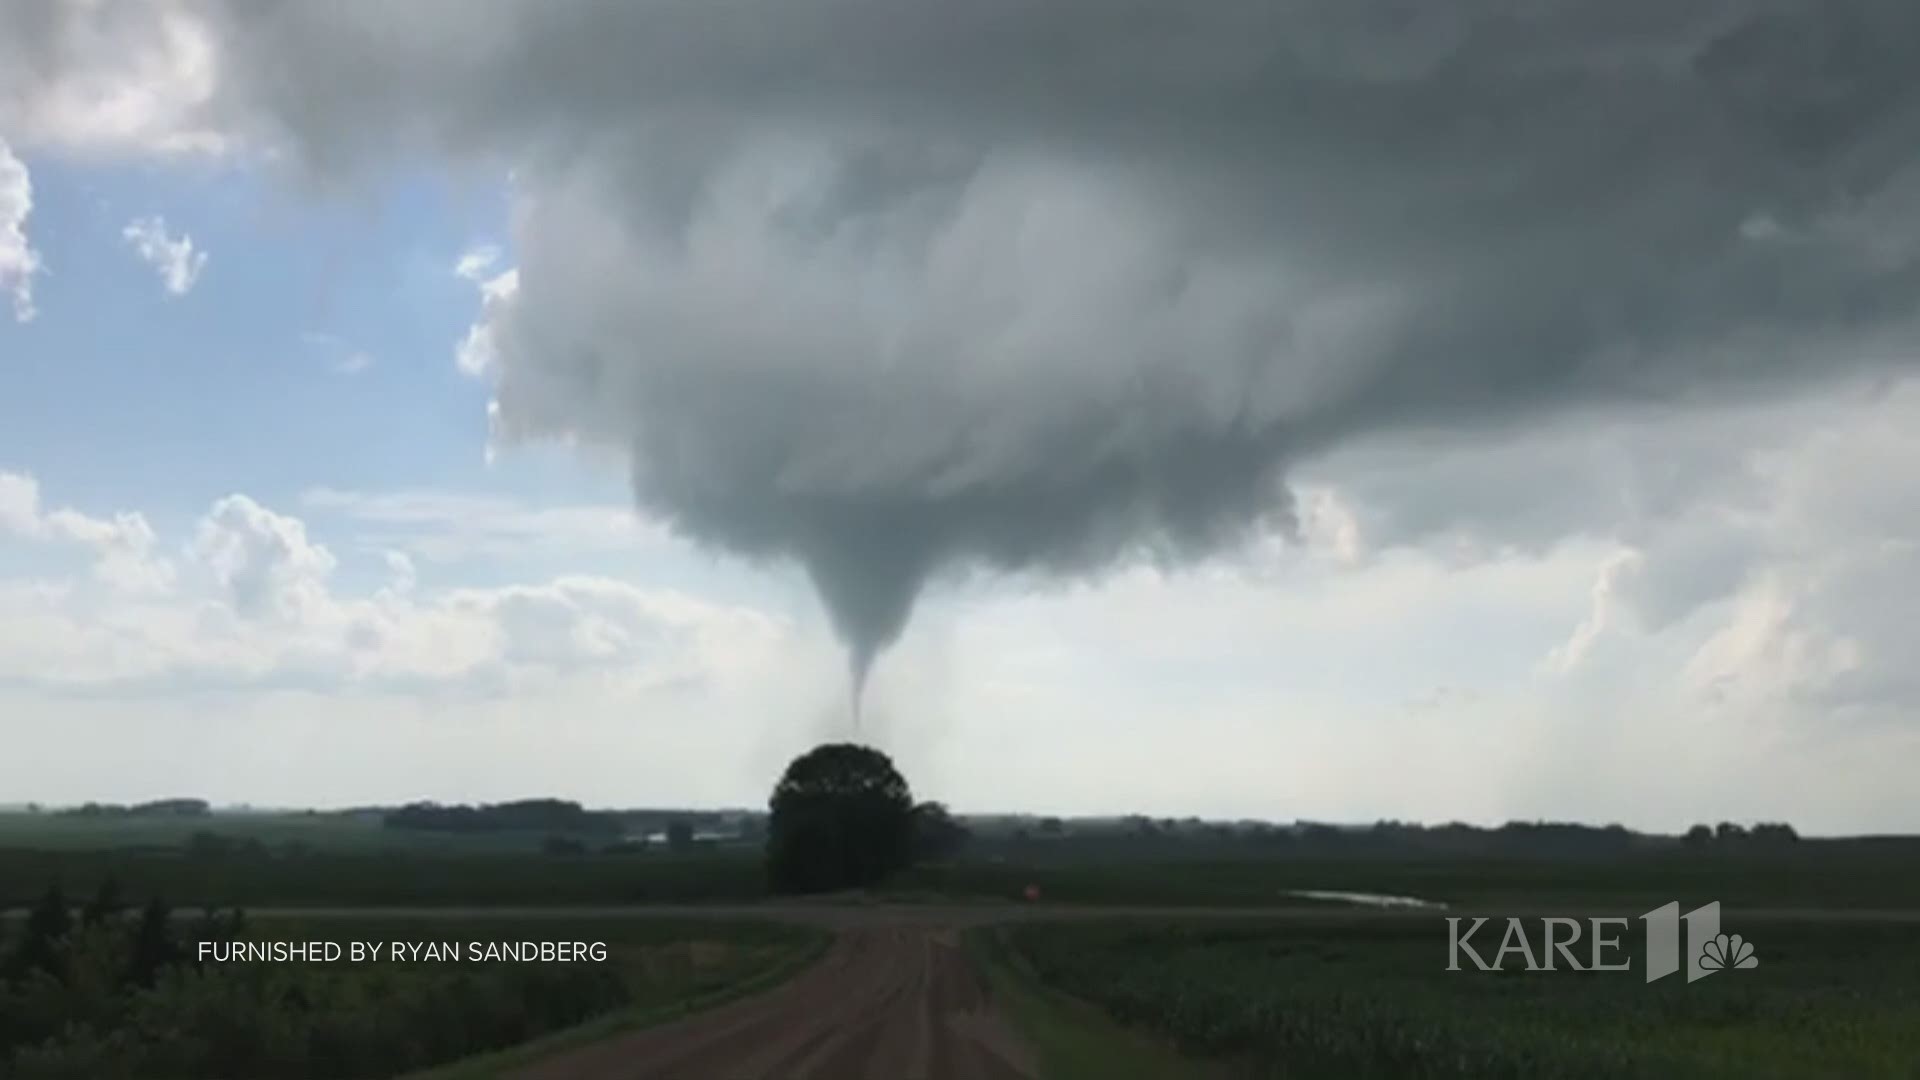 Ryan Sandberg furnished this video of a tornado near Ashby, Minnesota on Wednesday, July 8, 2020, as he narrated what he was seeing.